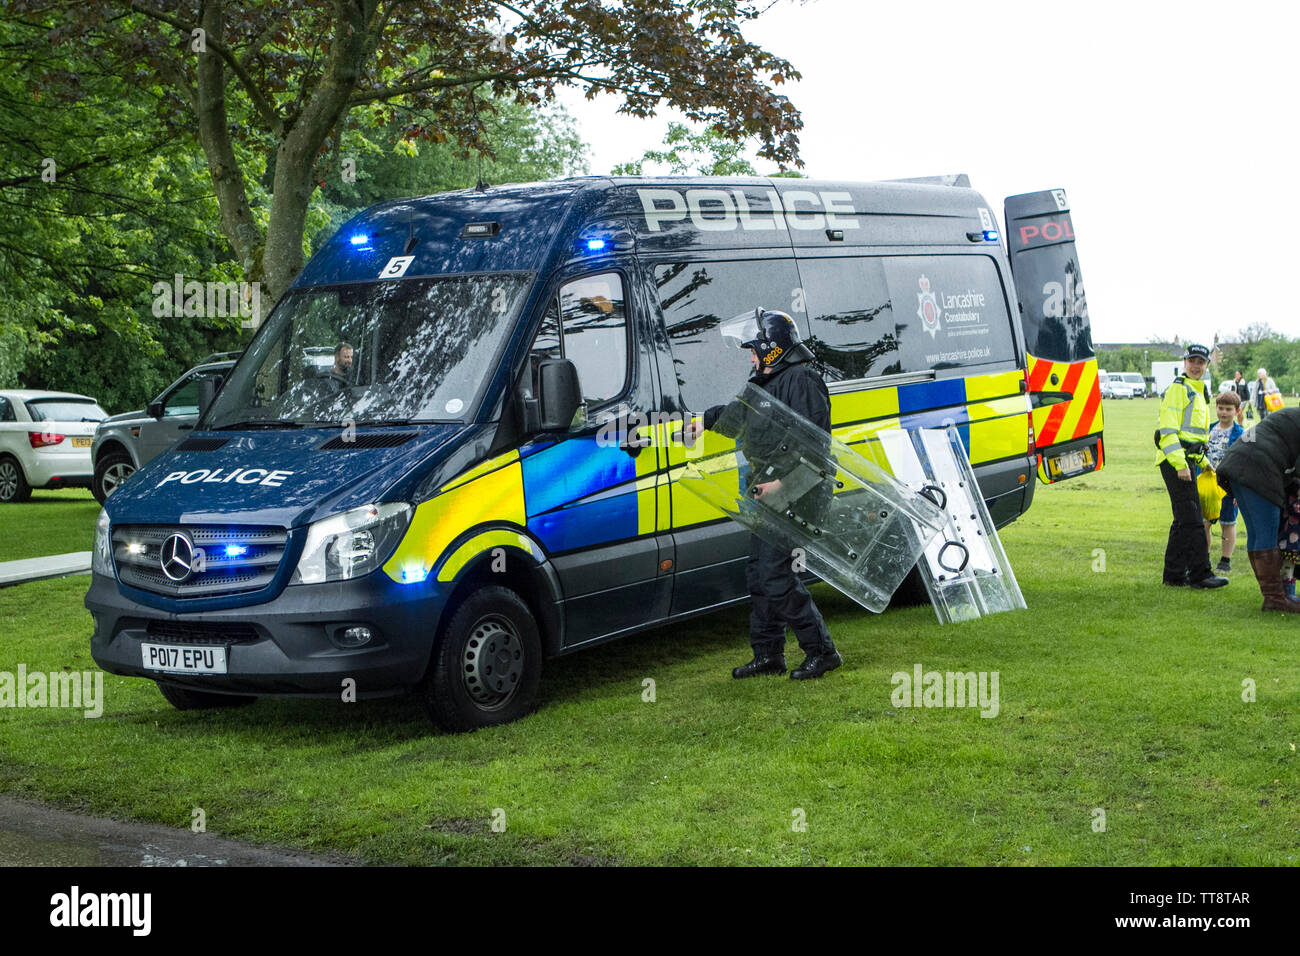 A British police force operational support division; Mercedes-Benz Sprinter 519 CDI vehicle, demonstration with riot gear protection clothing Stock Photo